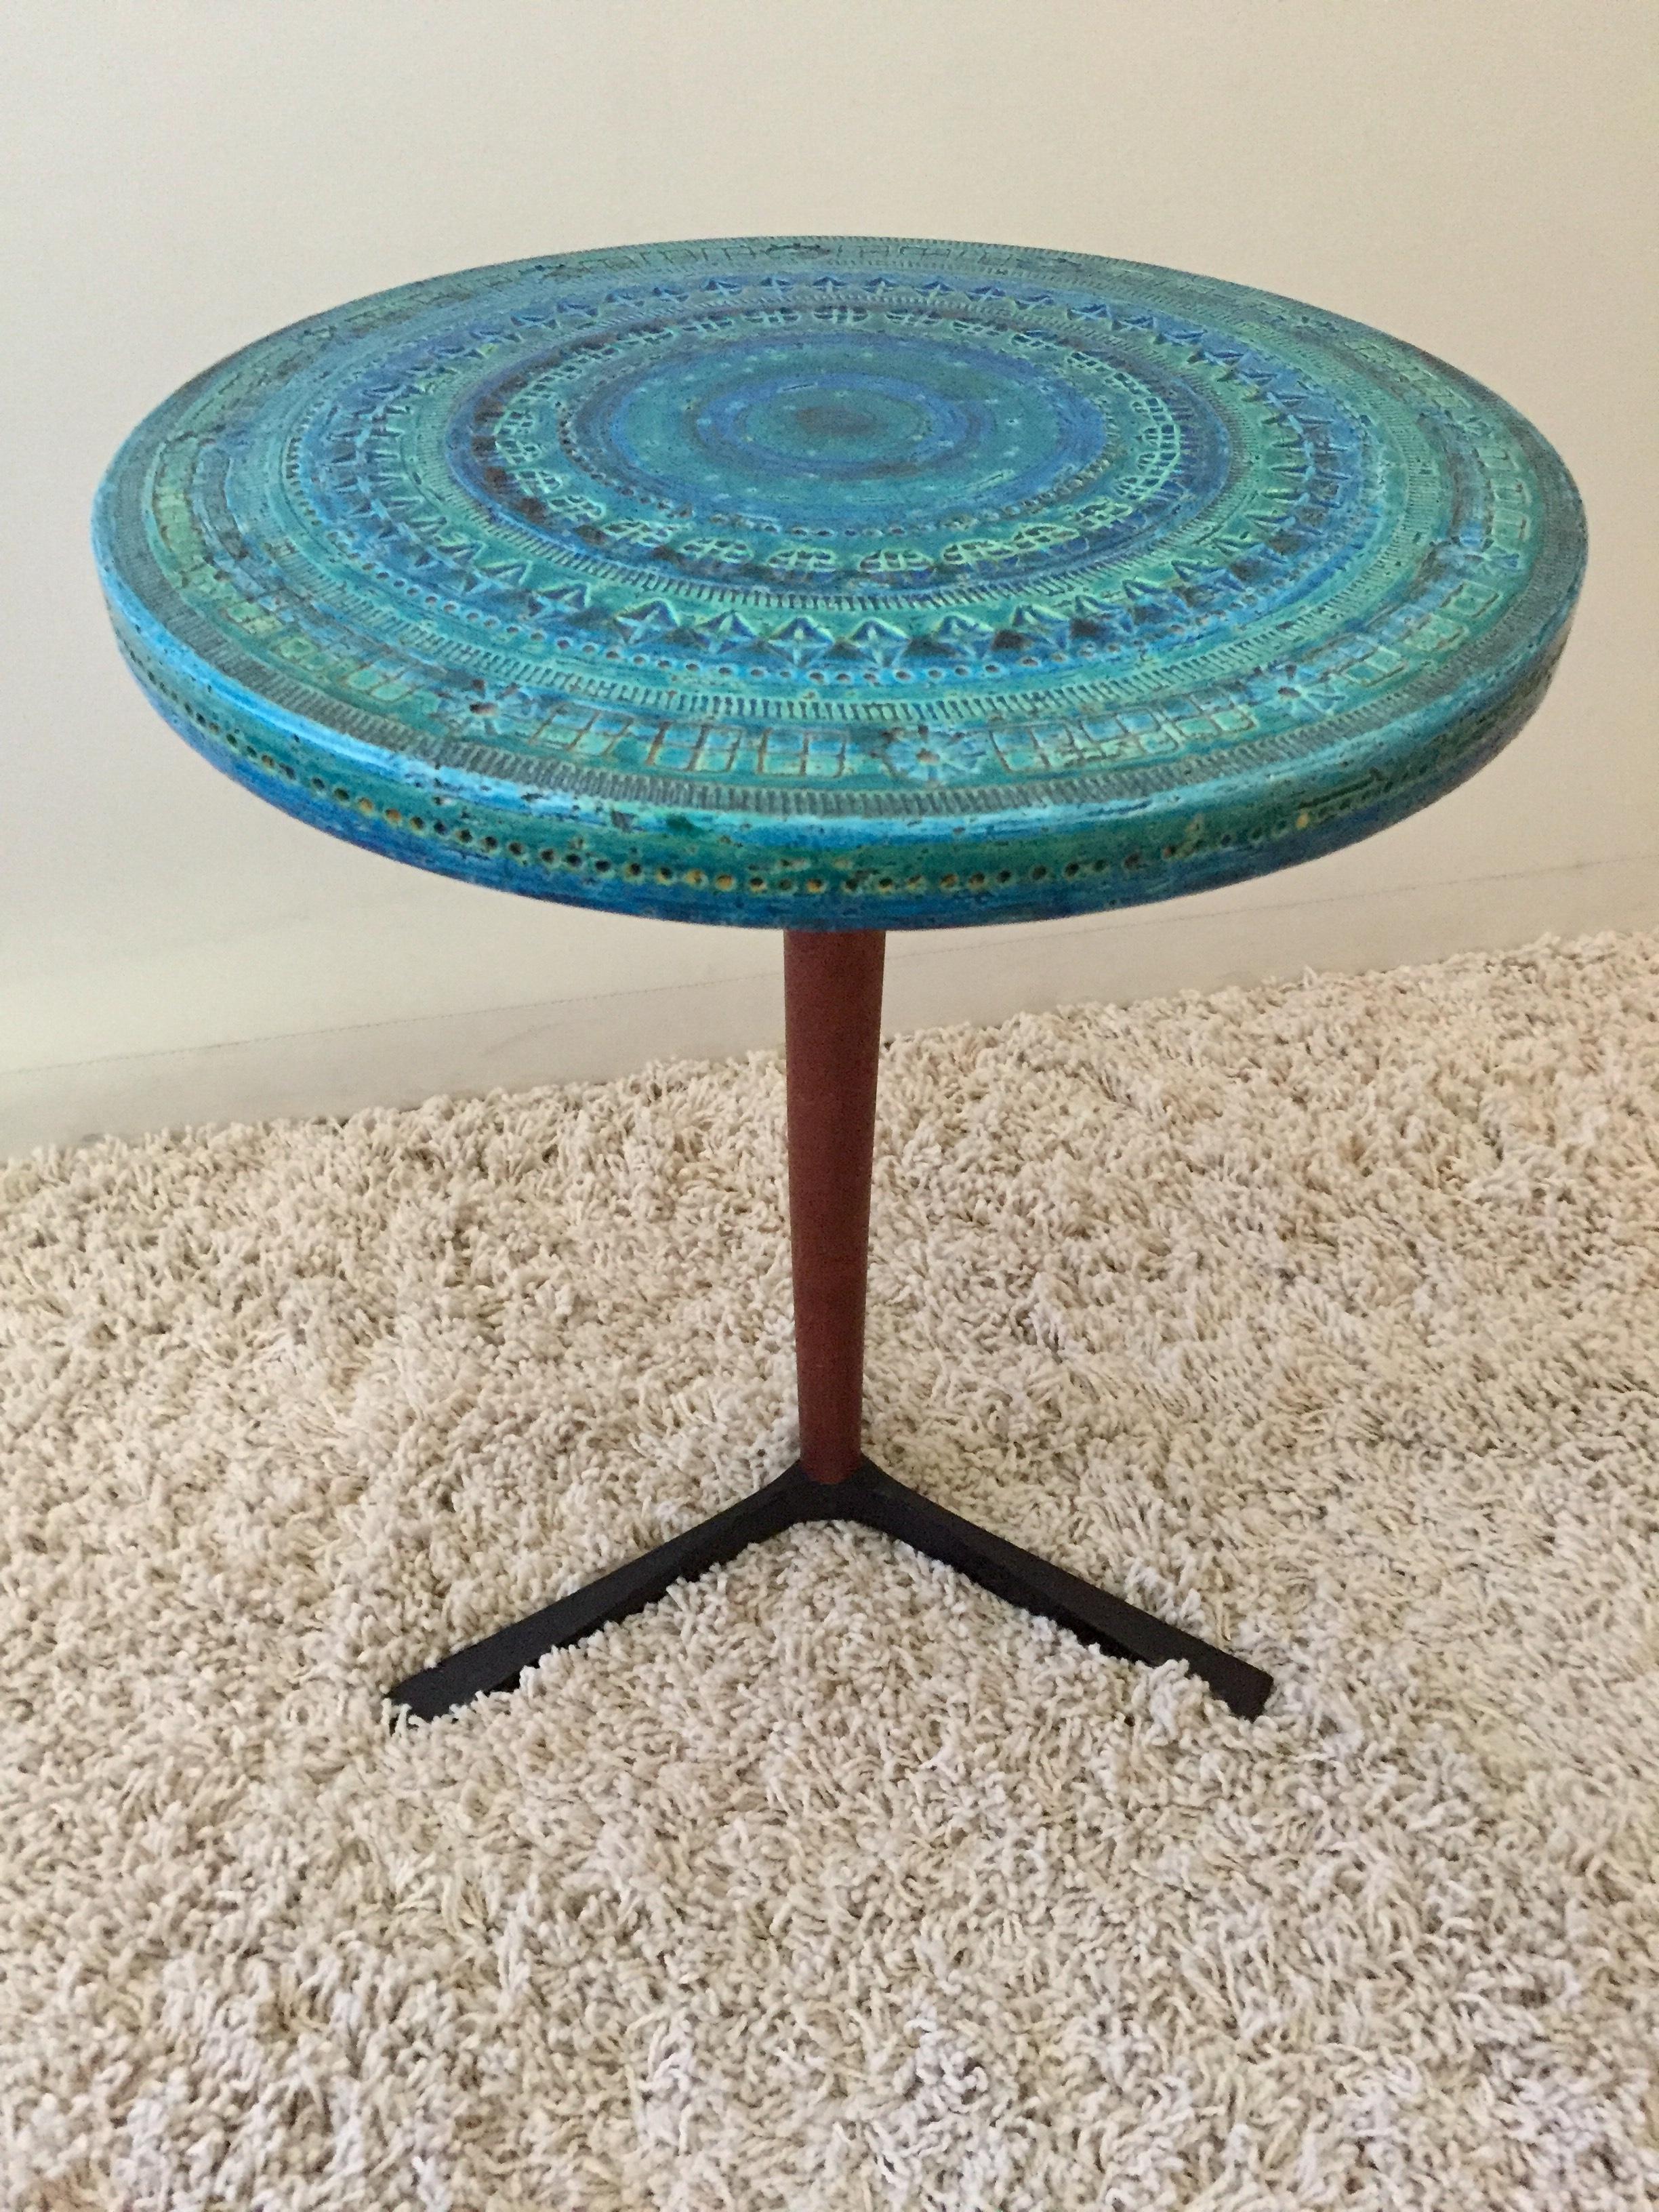 Aldo Londi Bitossi blue ceramic teak and black iron base table with paper label and signed number underside. Original condition. Retailed for Raymor co. Ceramics were made in Italy, but the table was produced in Denmark.